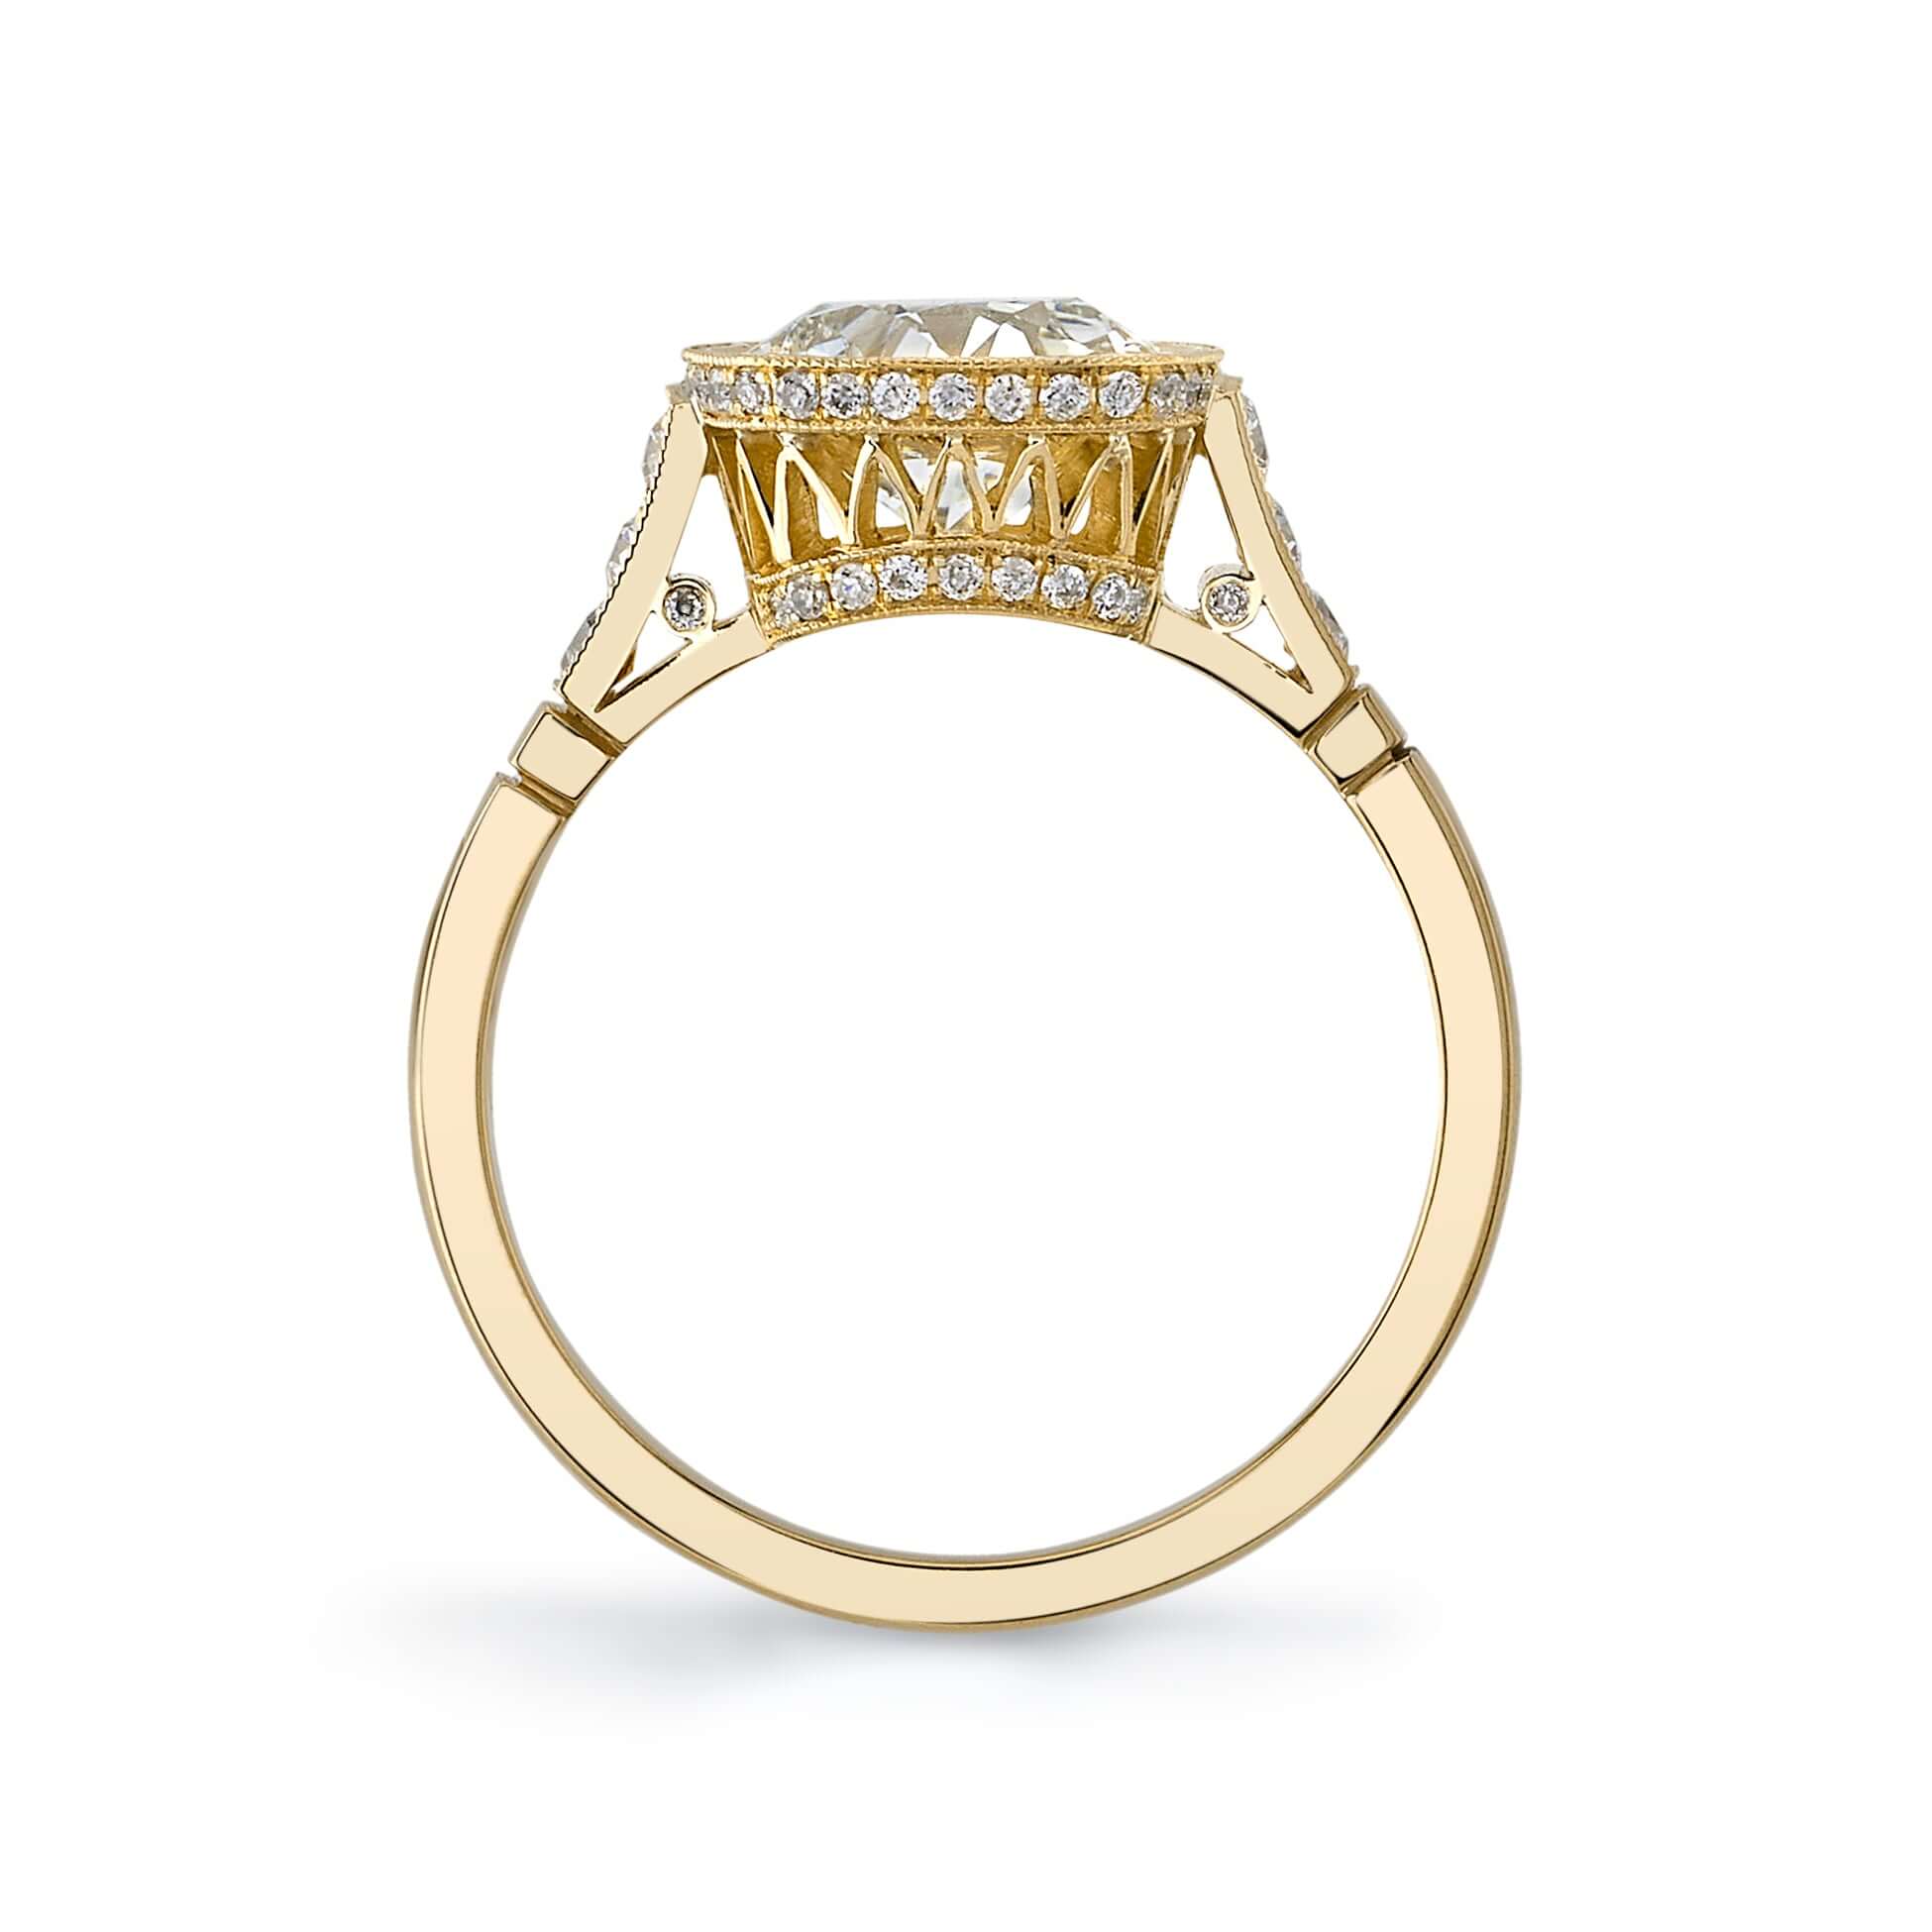 SINGLE STONE COLETTE RING featuring 1.73ct N/VVS2 GIA certified old European cut diamond with 0.25ctw old European cut accent stones set in a handcrafted 18K yellow gold mounting.